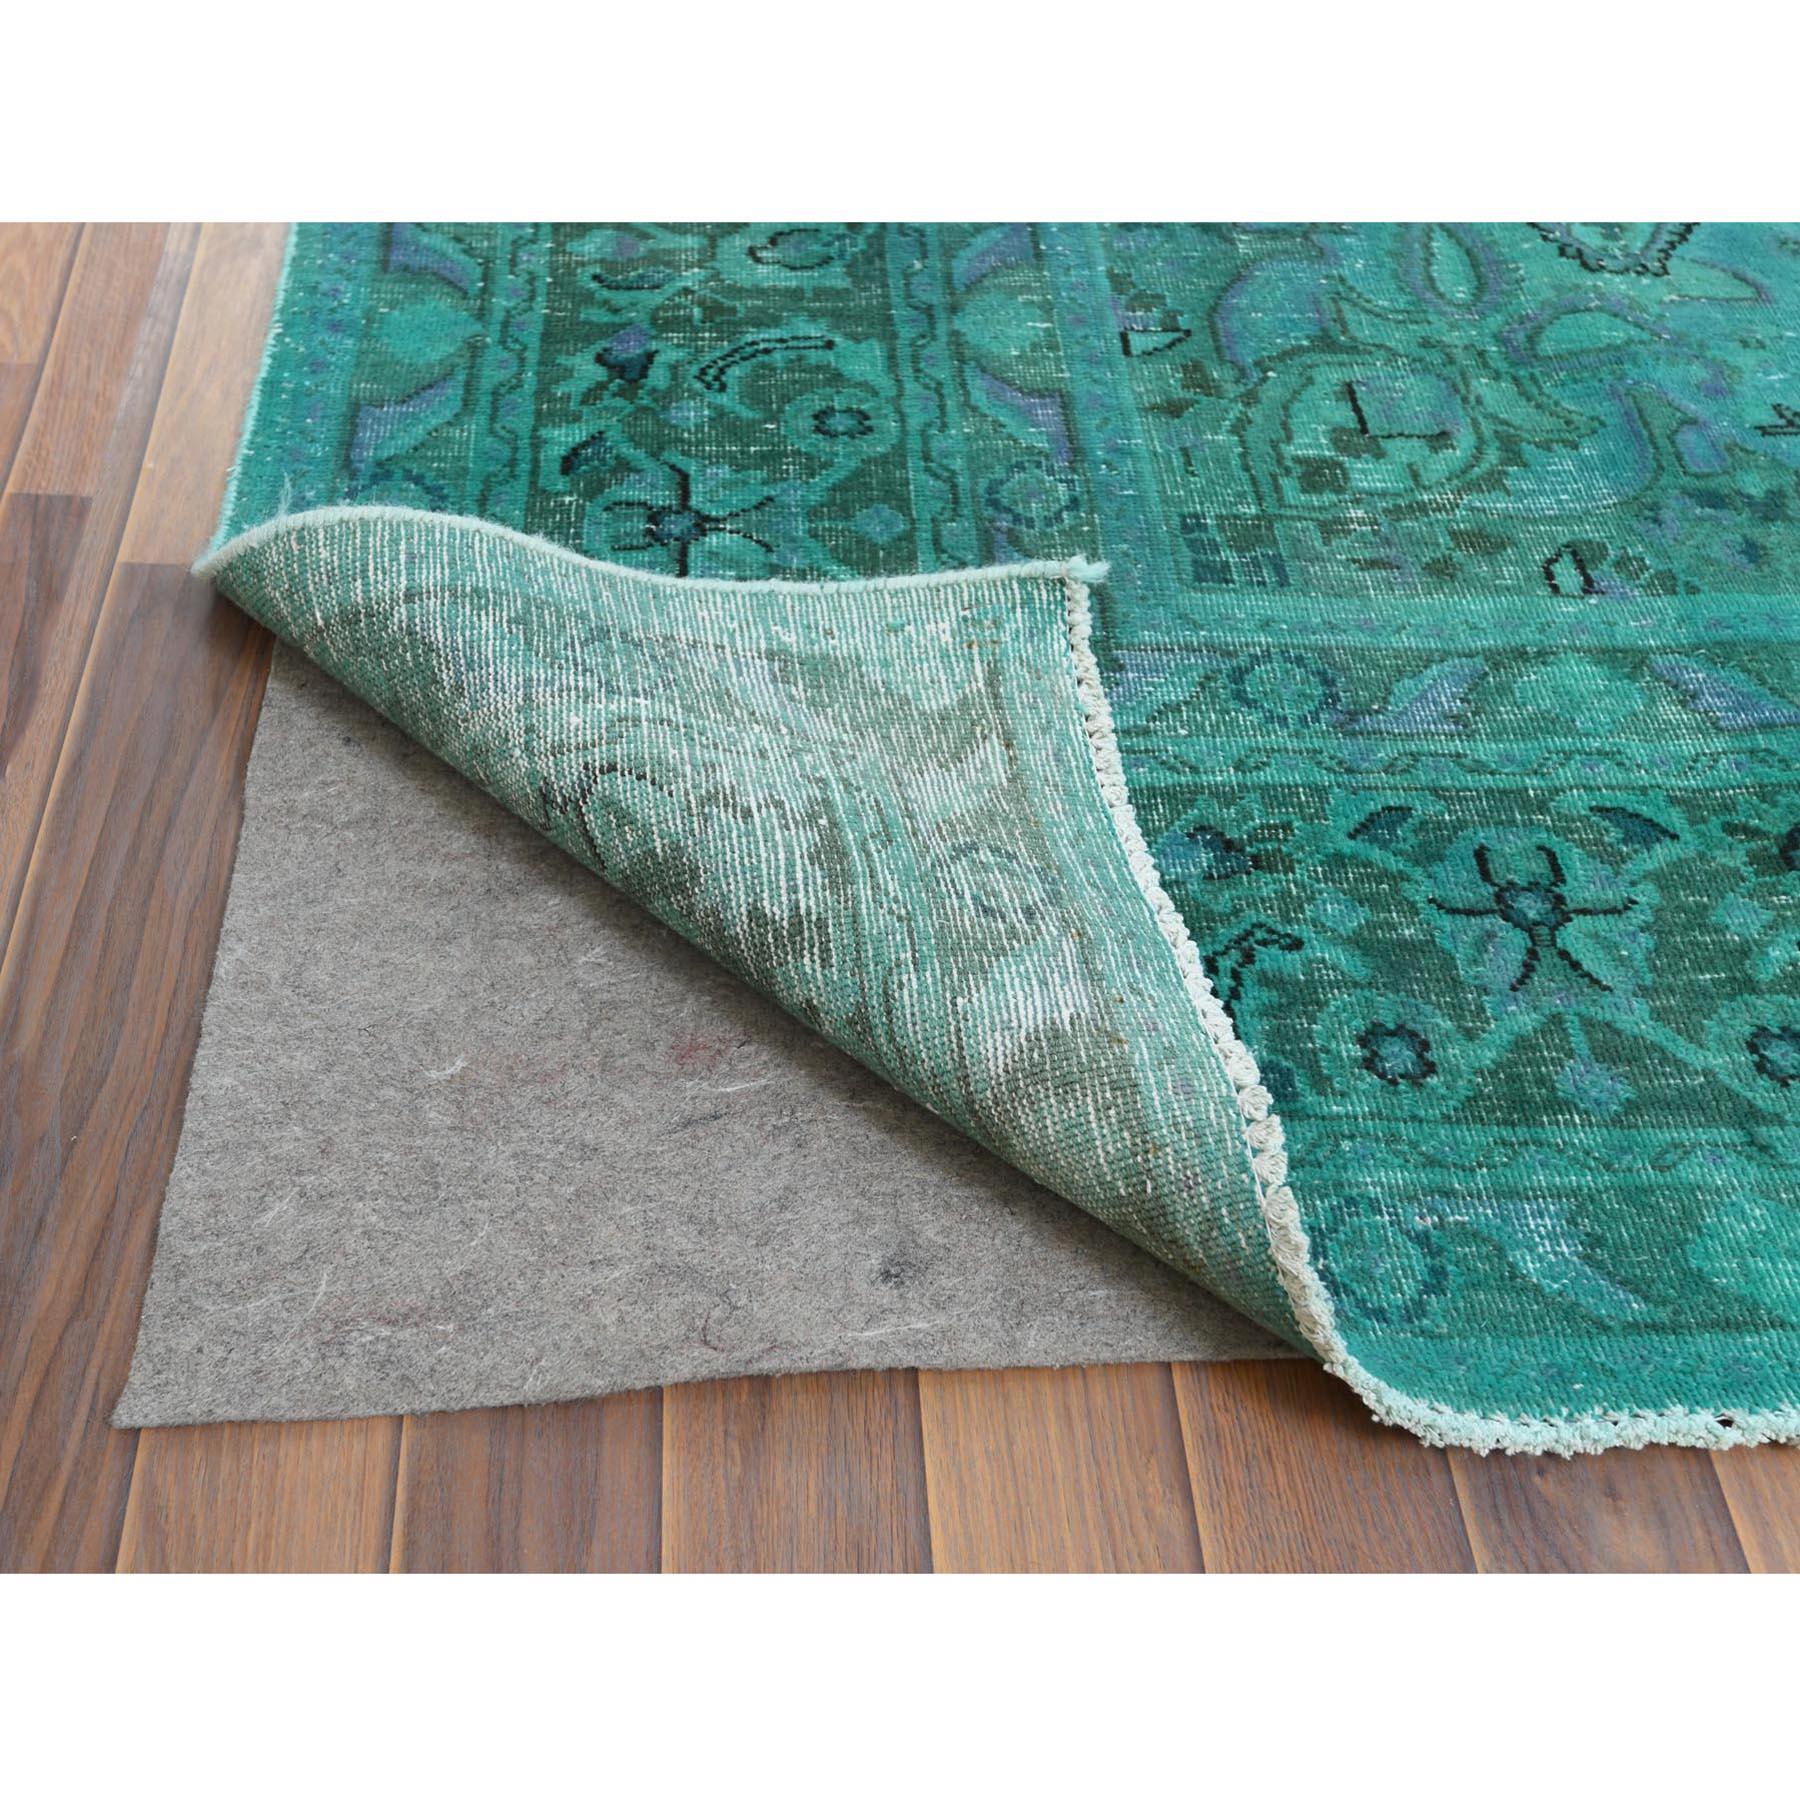 Mid-20th Century Teal Green Vintage Overdyed Persian Tabriz Distressed Worn Wool Hand Knotted Rug